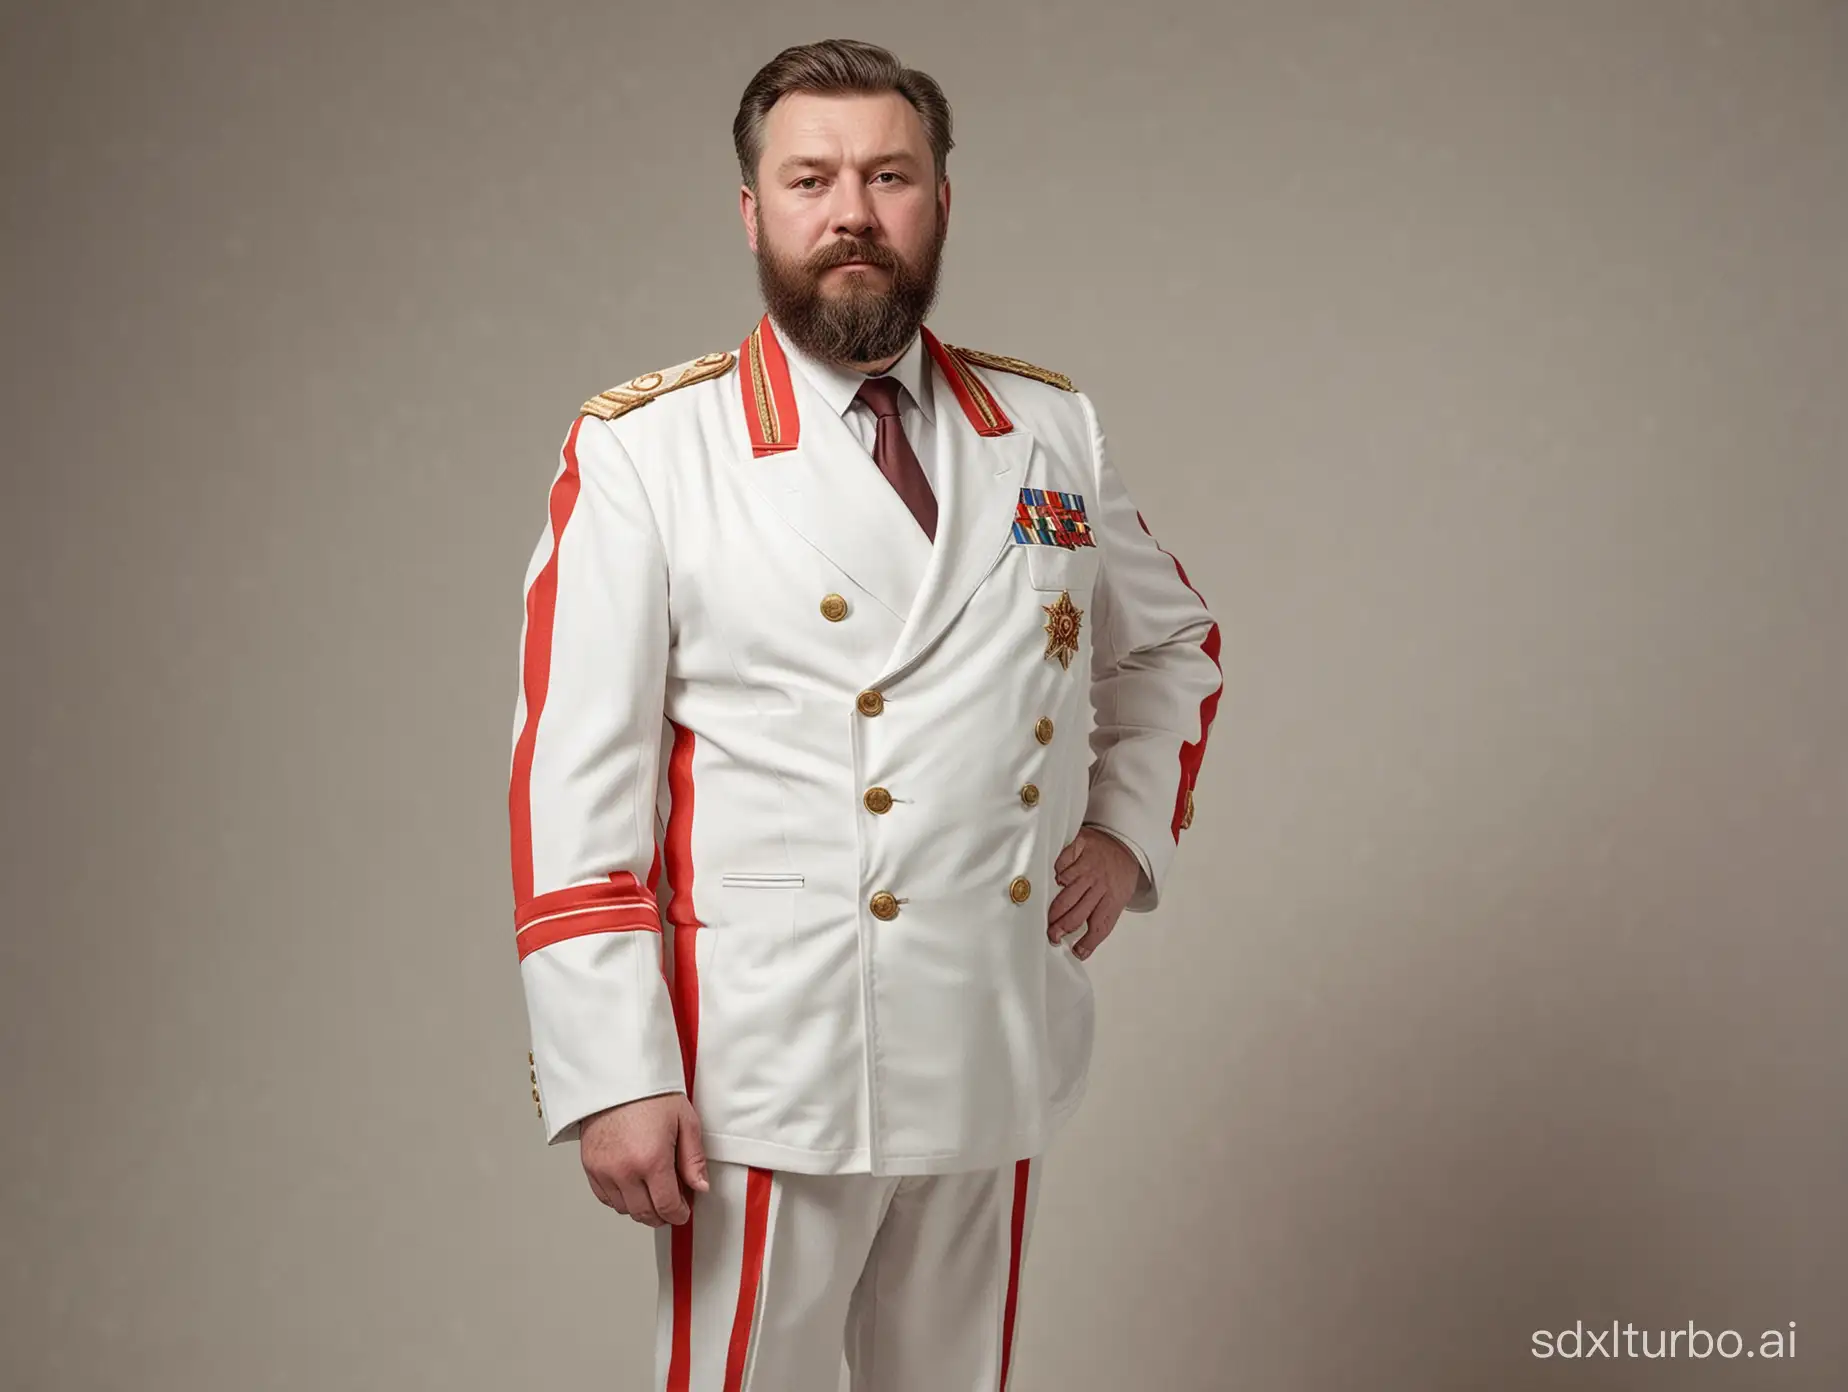 Full body portrait of a soviet leader in a white suit with red stripes, full body image, raw photo, chubby, beard, caucasian